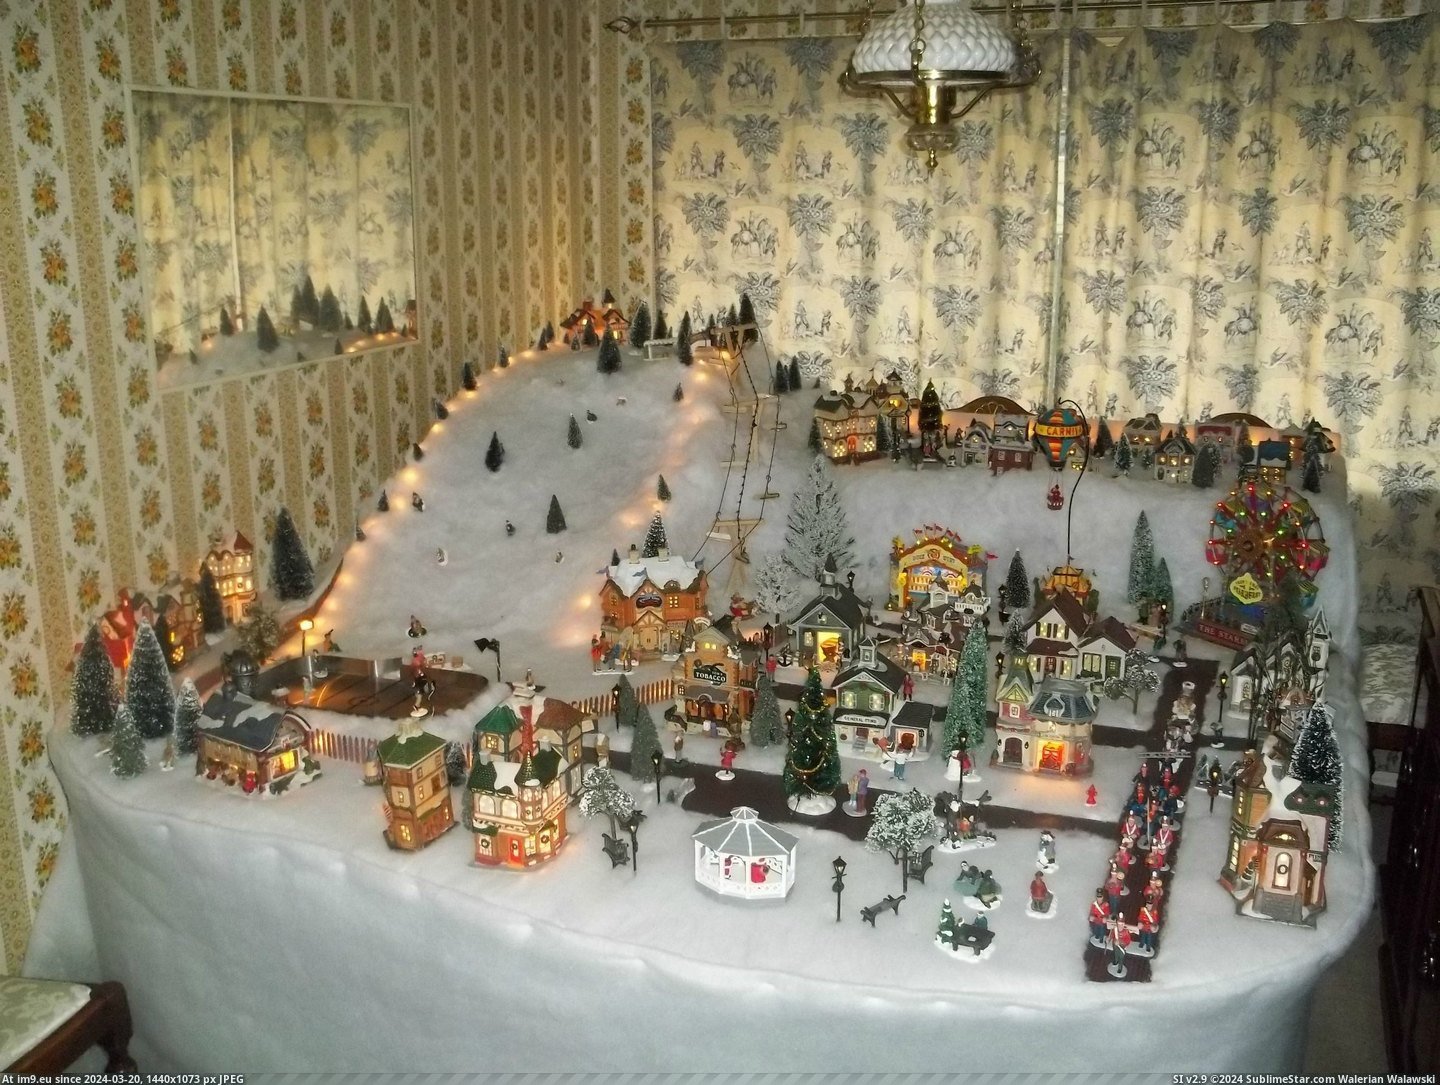 #Wife #Christmas #She #Village #Hobbies #How #Get #Wanted [Pics] The wife said she wanted a Christmas village, she should know how serious I get with hobbies. Pic. (Obraz z album My r/PICS favs))